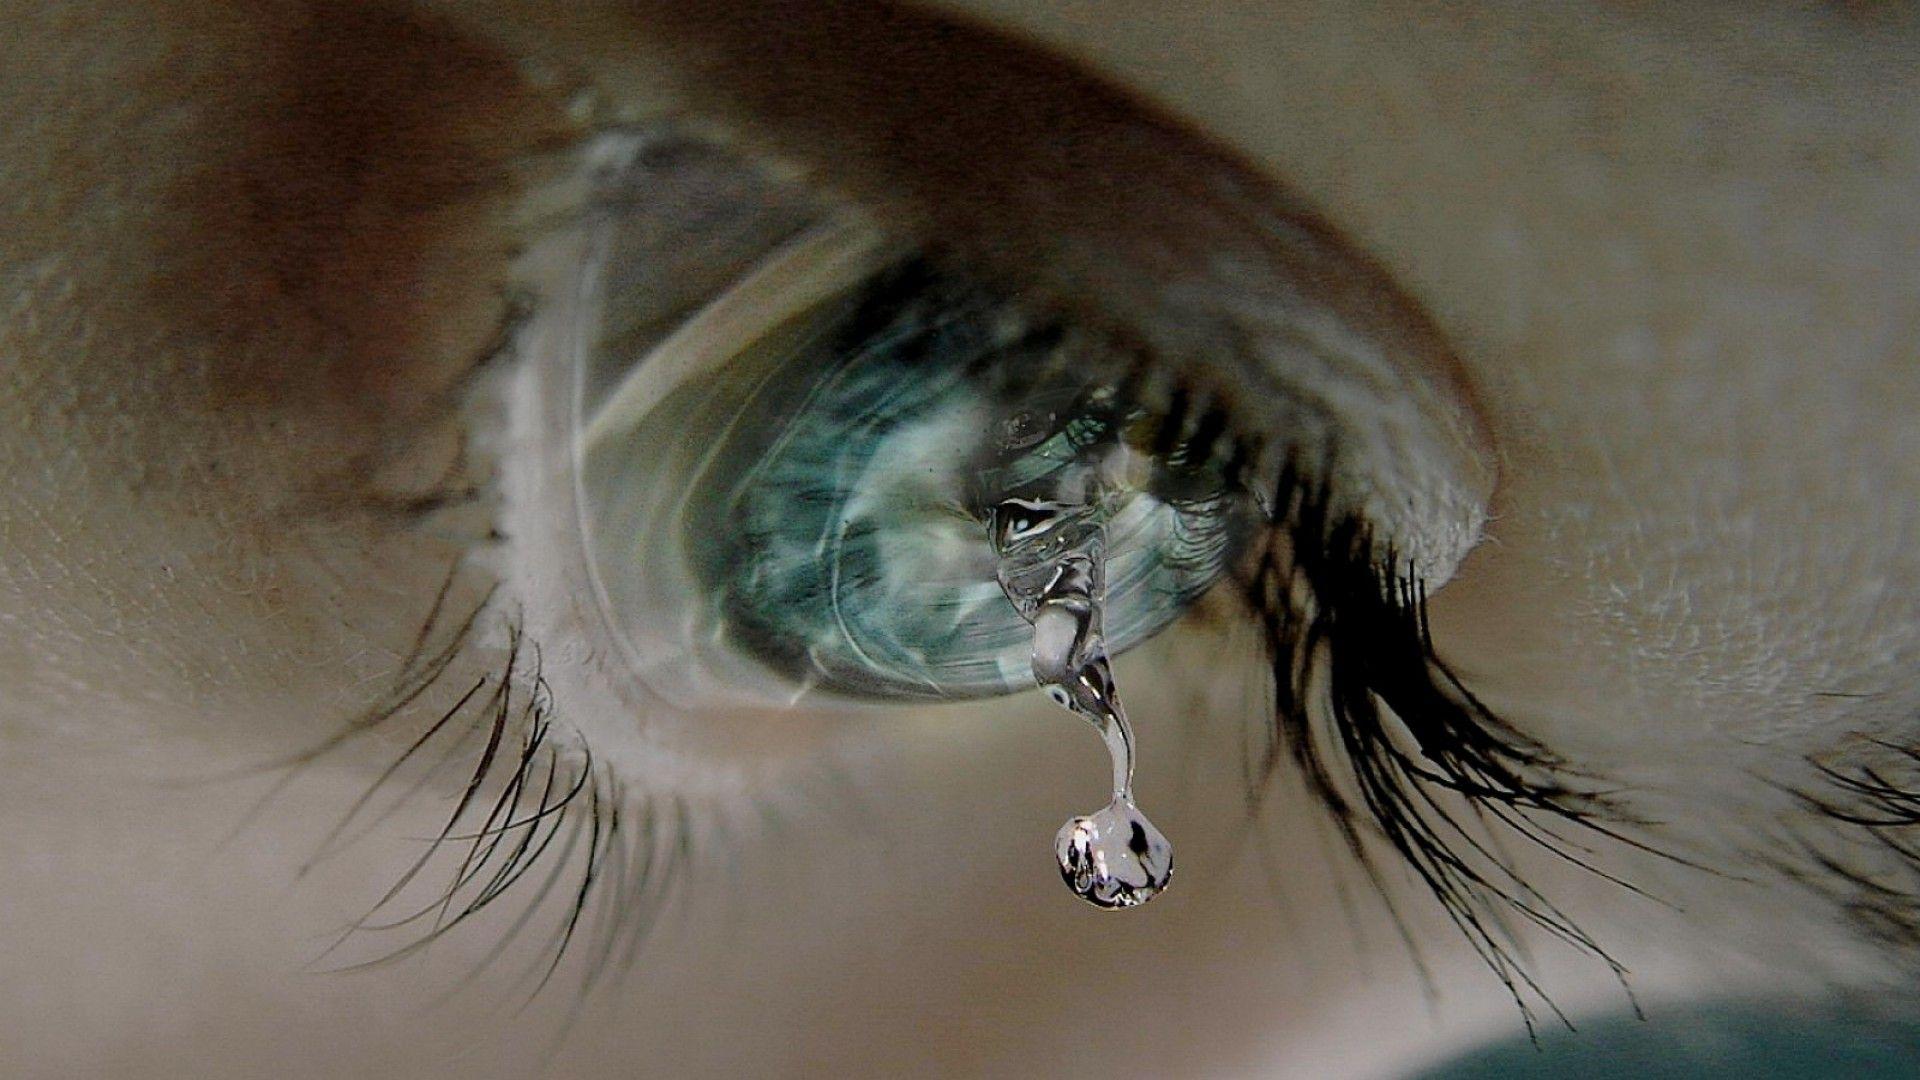 Most Beautiful Eyes with Tears Wallpaper 8. Cry Me A River. Tears in eyes, Crying eyes, Eyes wallpaper